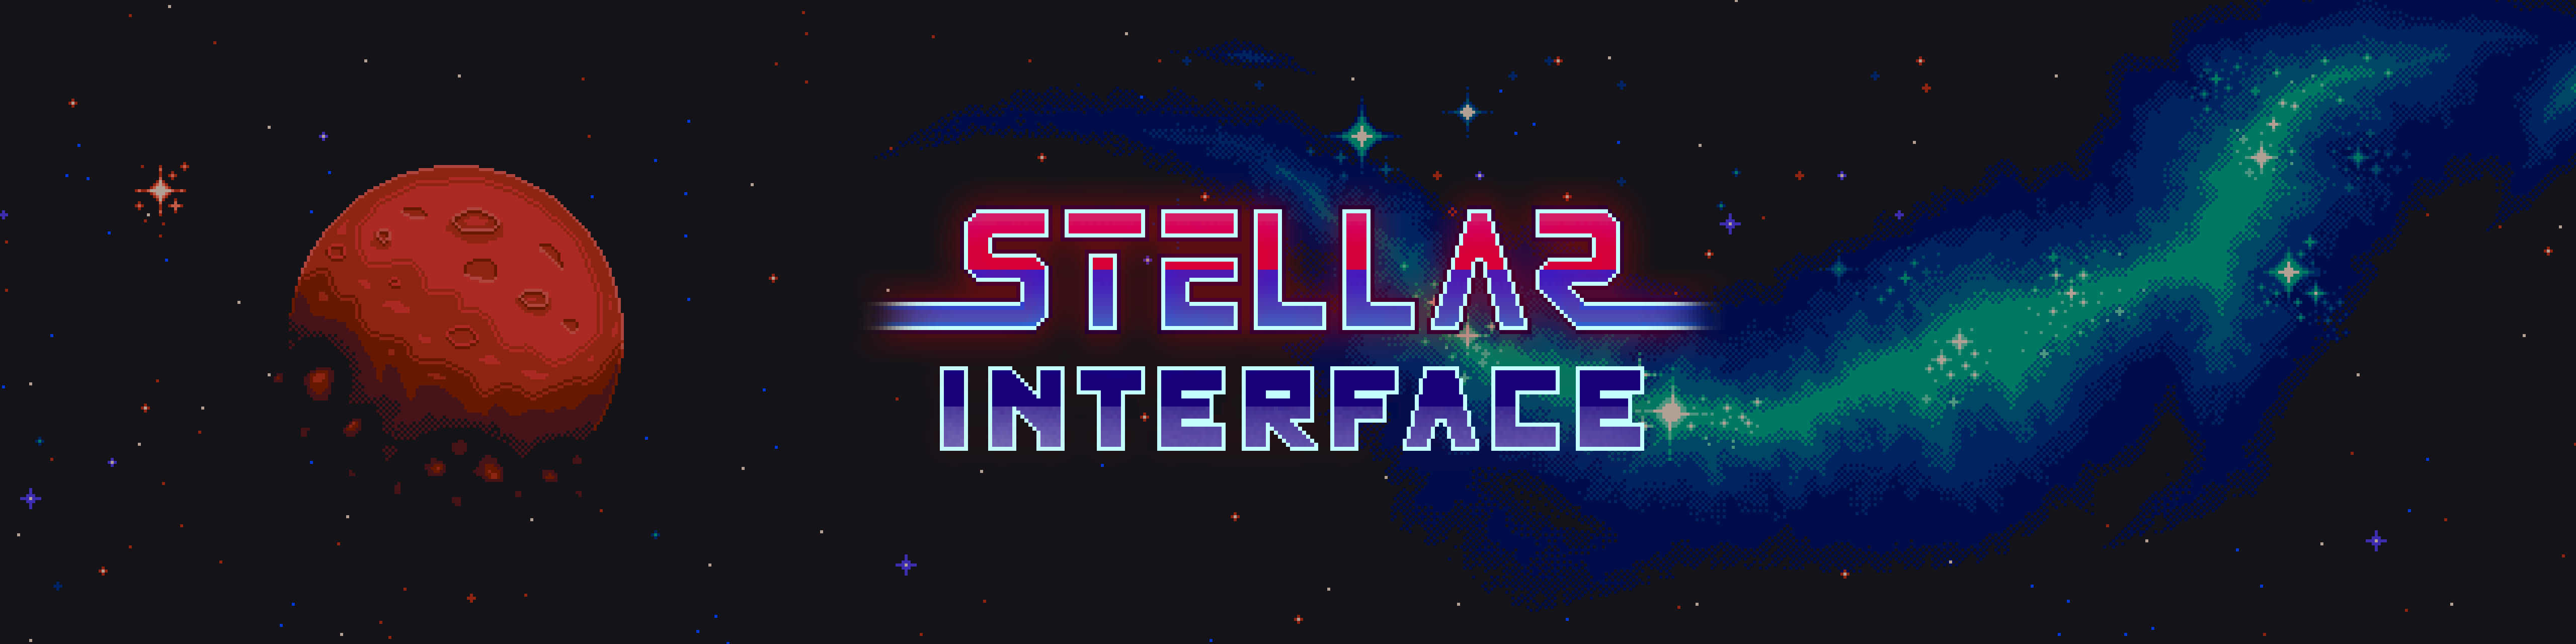 Stellar Interface download the last version for windows